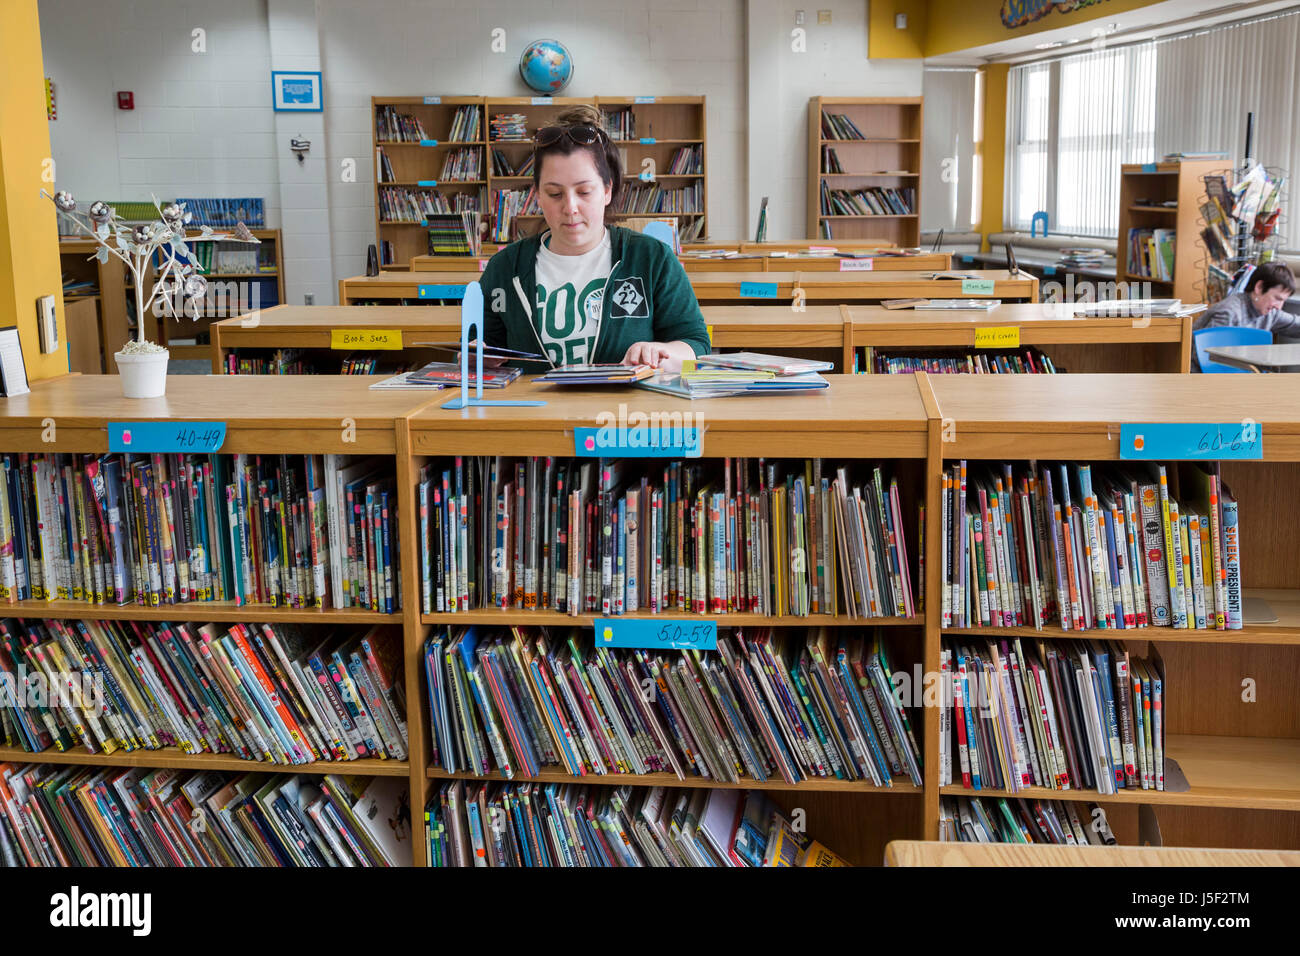 Detroit, Michigan - Volunteers from Muslim, Jewish, and other groups clean, paint, and organize books in the library at Schulze Academy for Technology Stock Photo